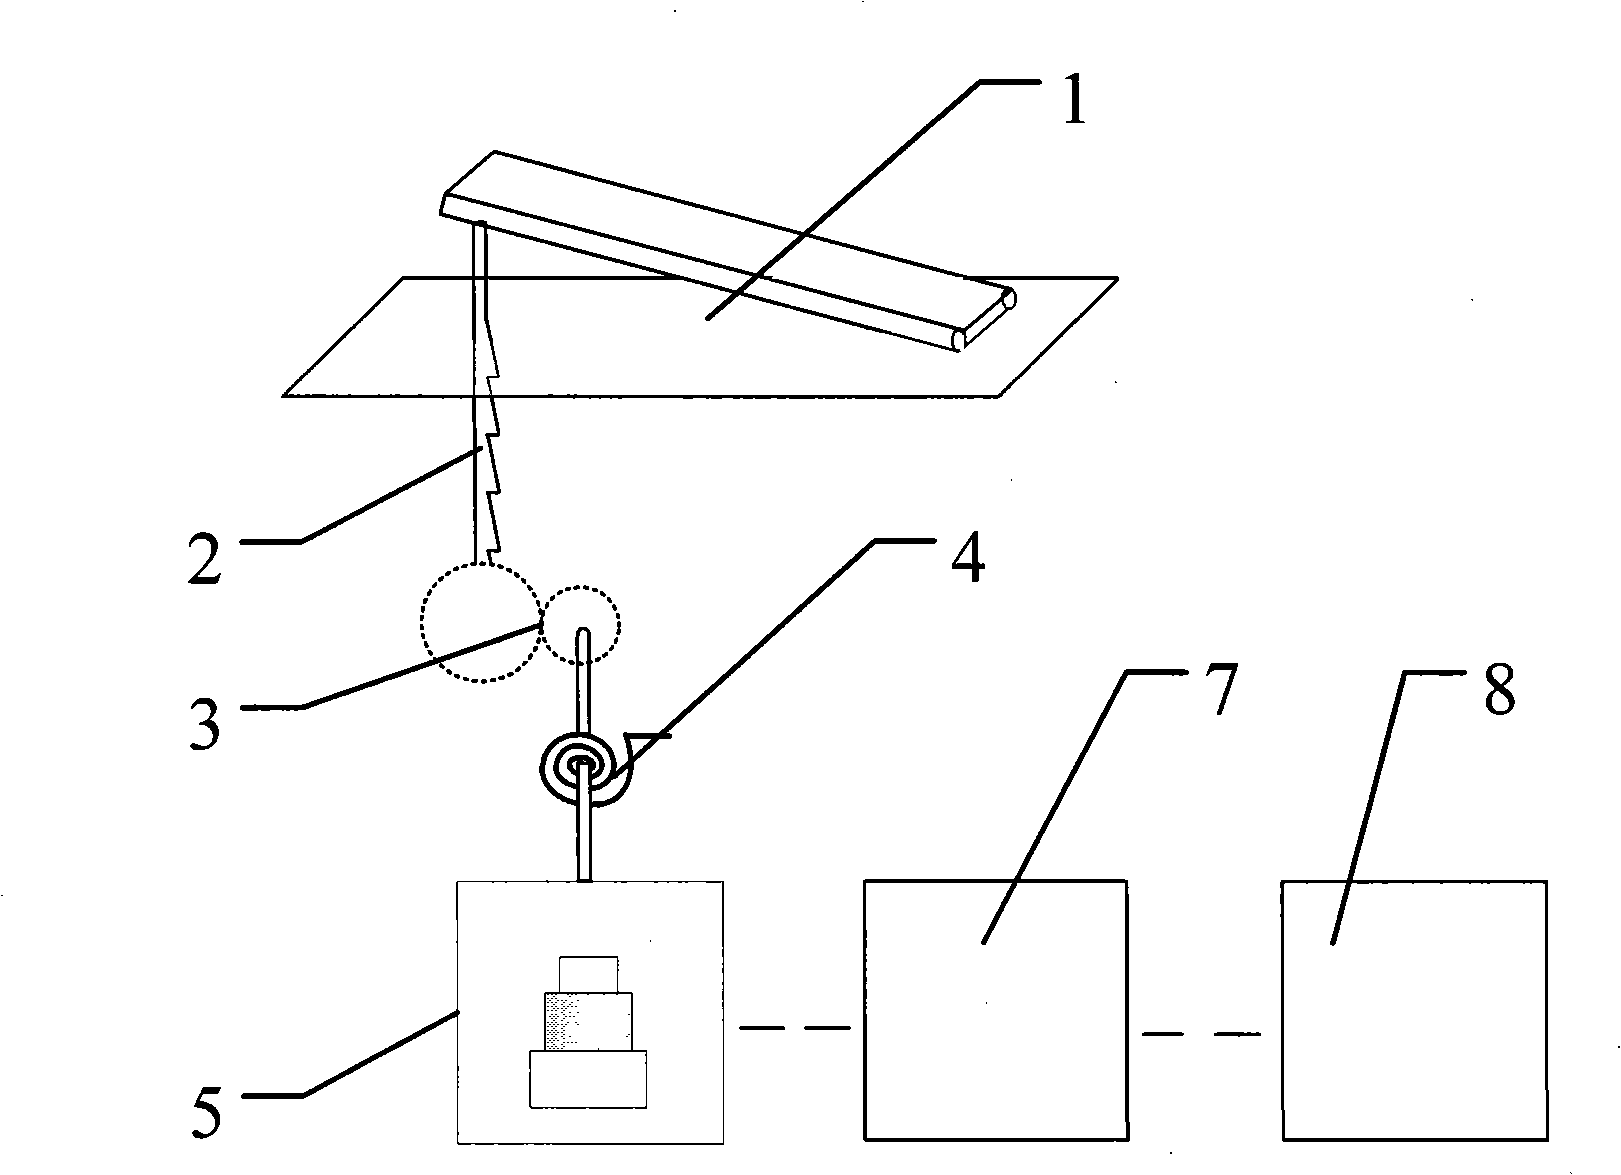 Trample generating set and pedal structure